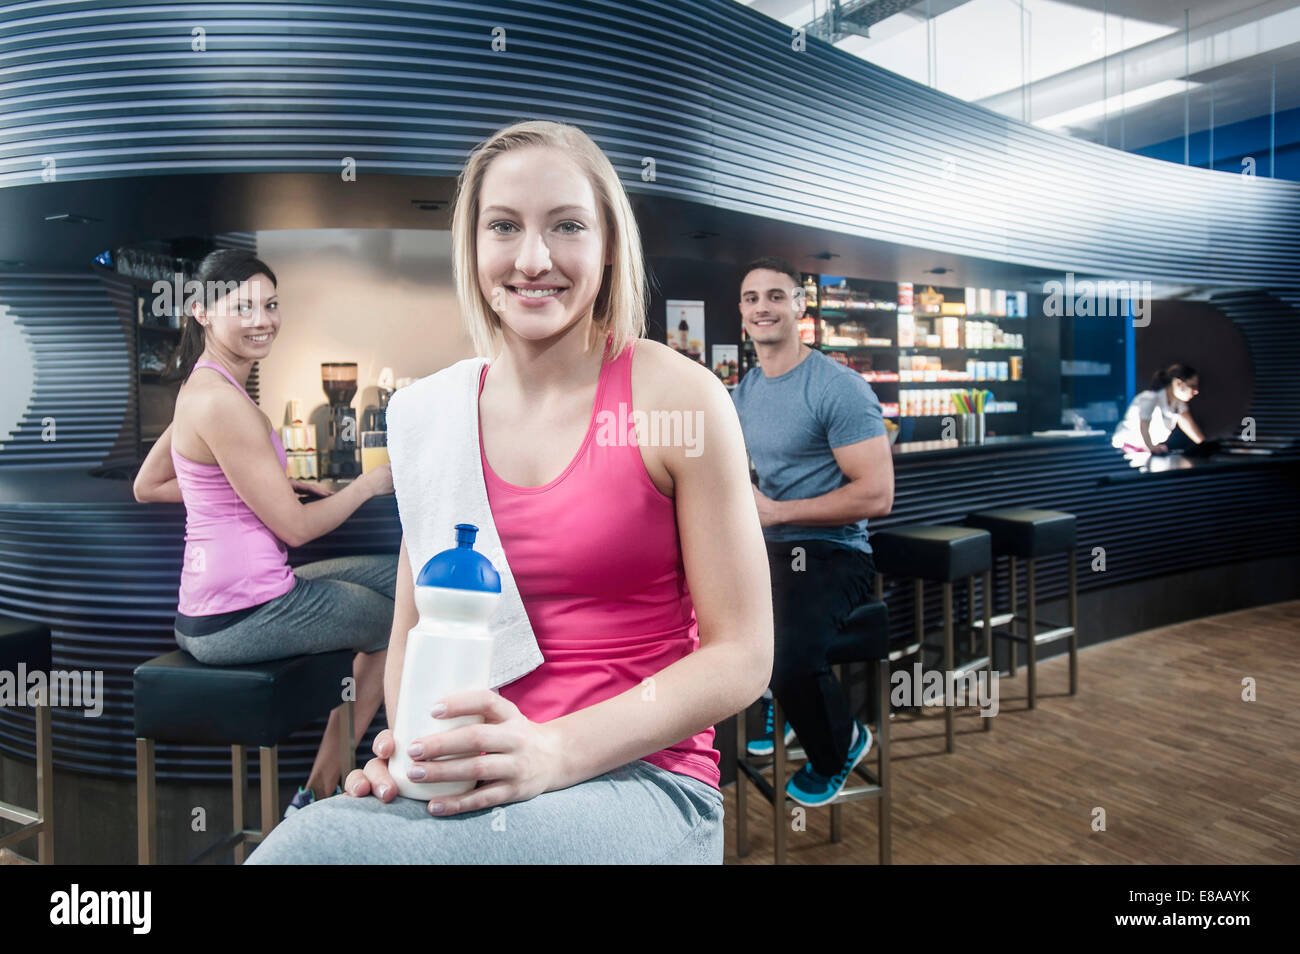 Smiling young woman at the bar of a gym Stock Photo